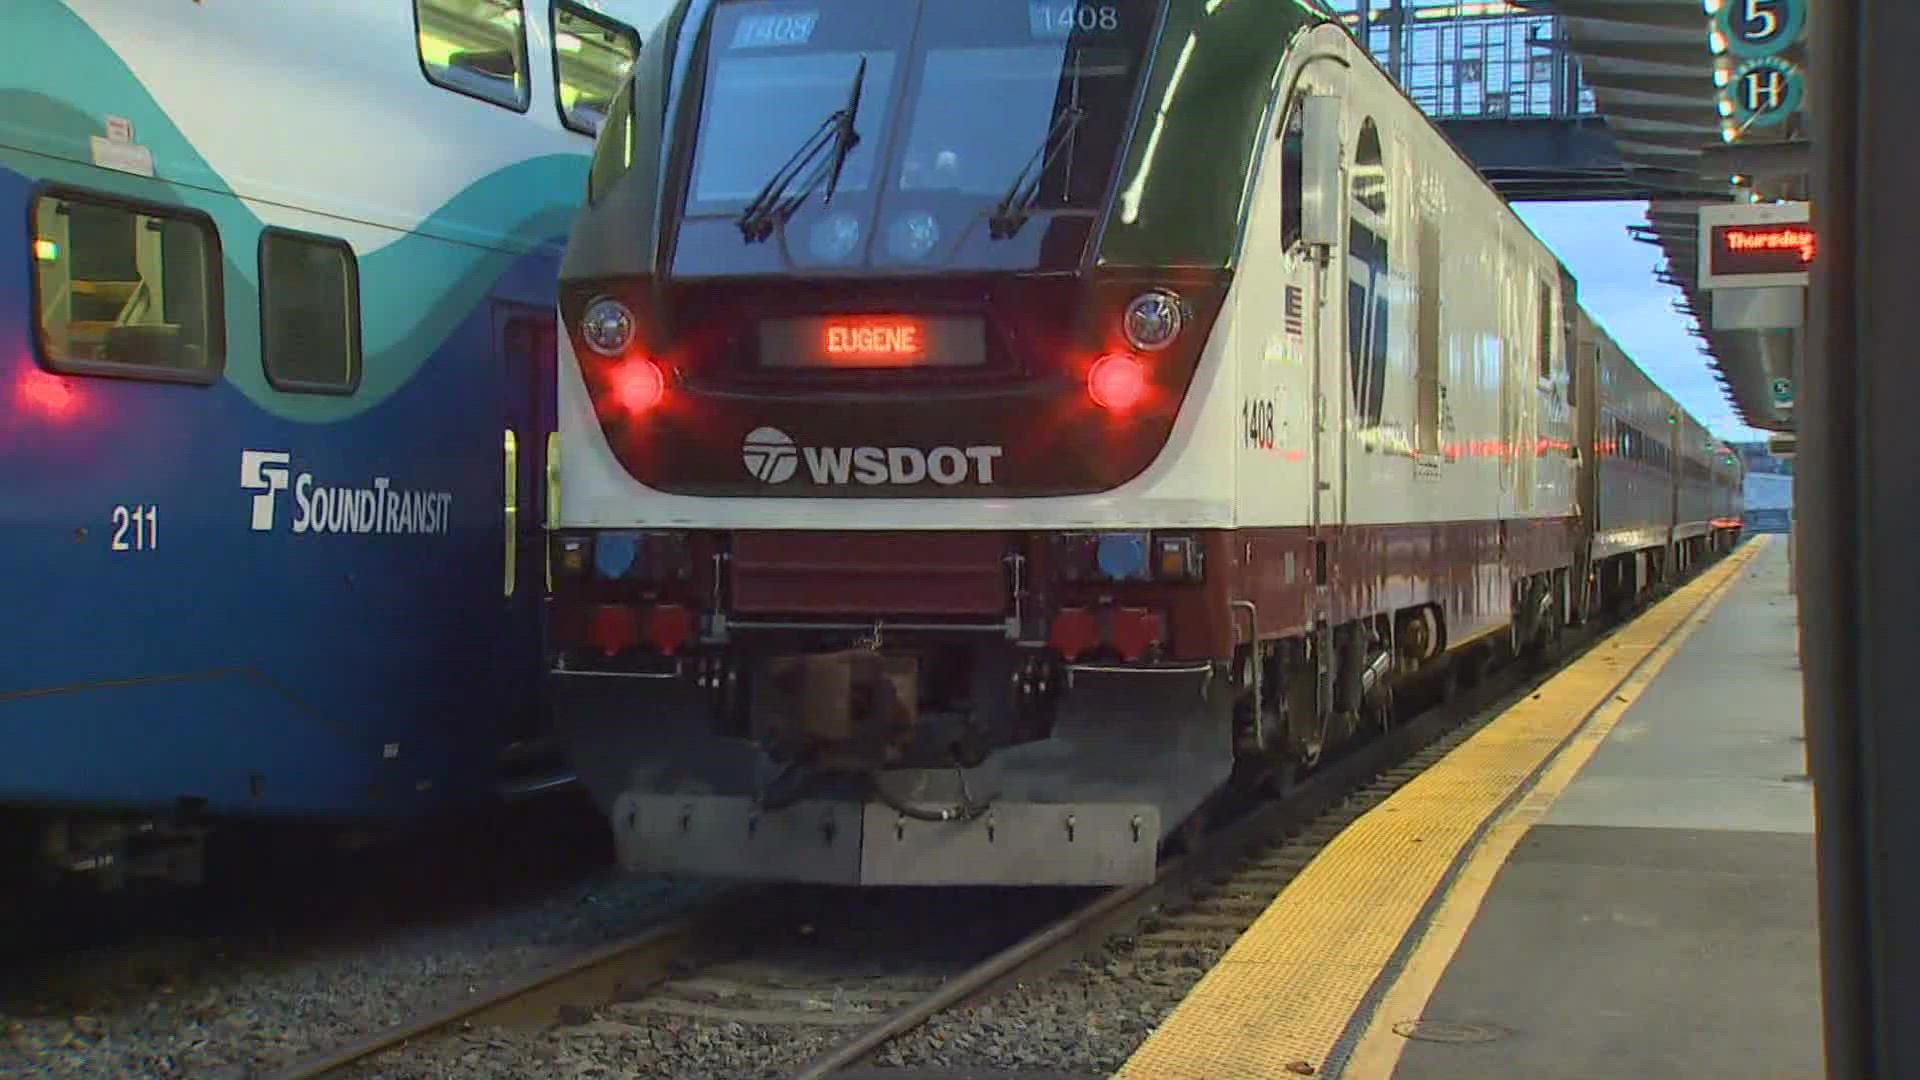 Amtrak said the Washington Department of Transportation and Oregon Department of Transportation "expressed extreme disassociation" with the delay.